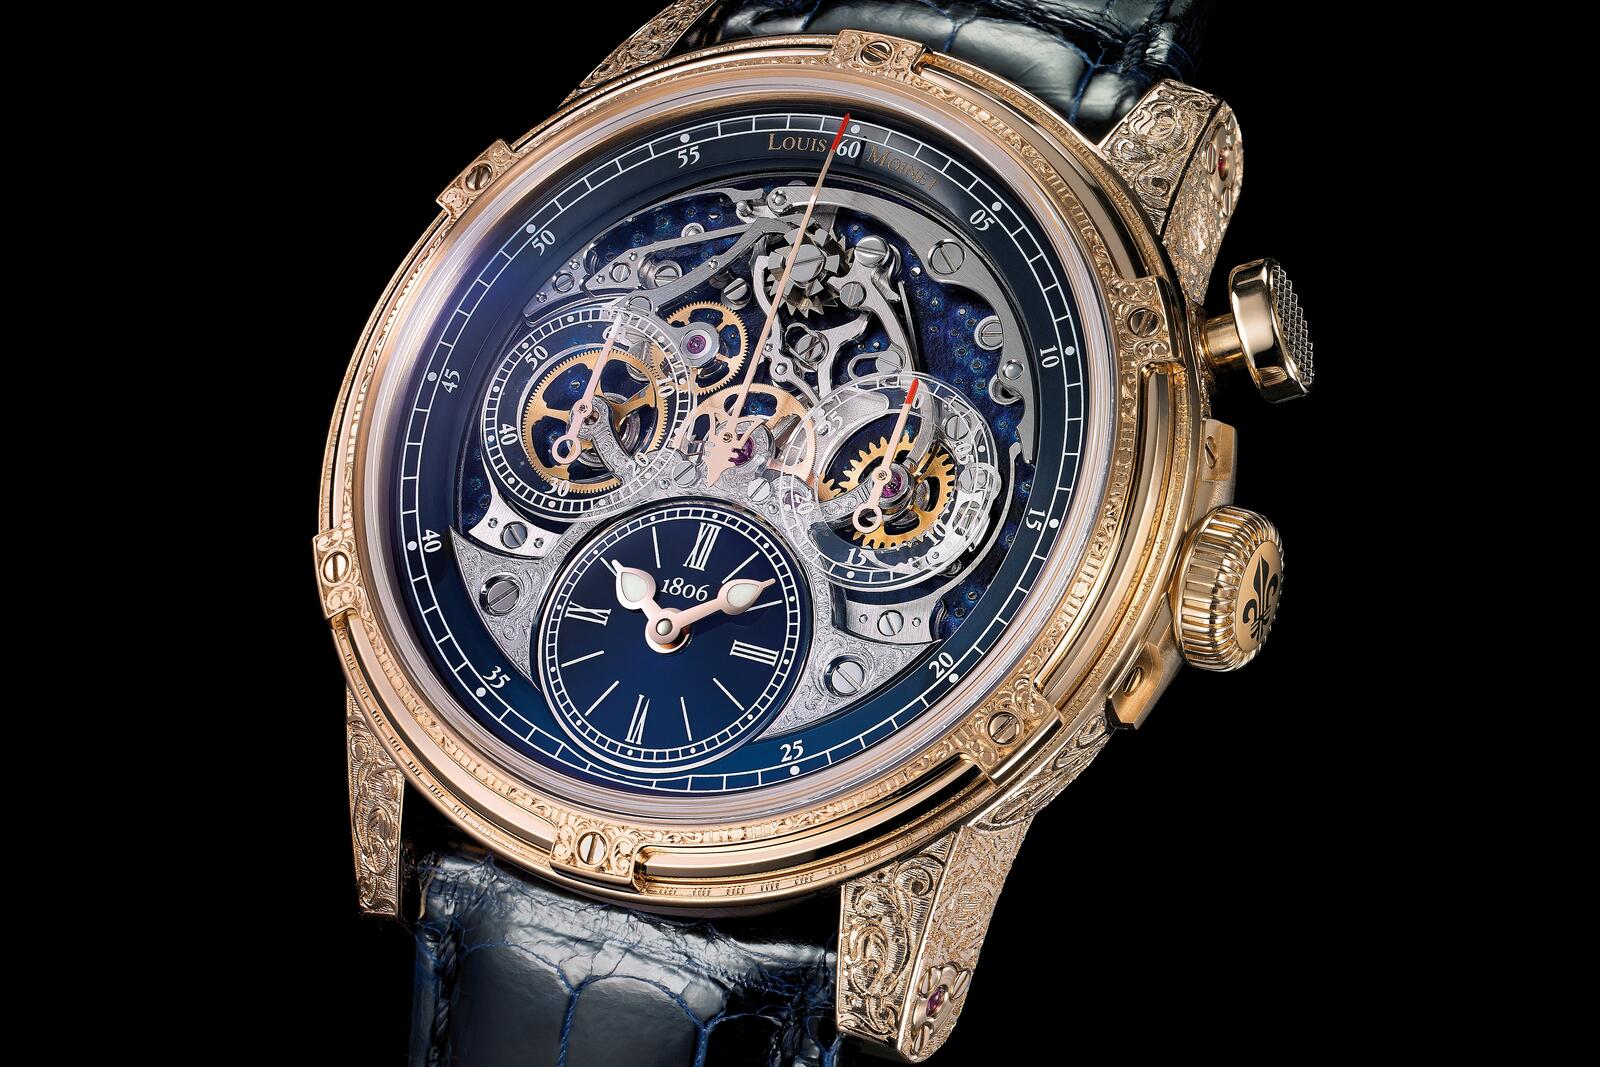 Free photo Luxury watches by Louis Moinet on black background